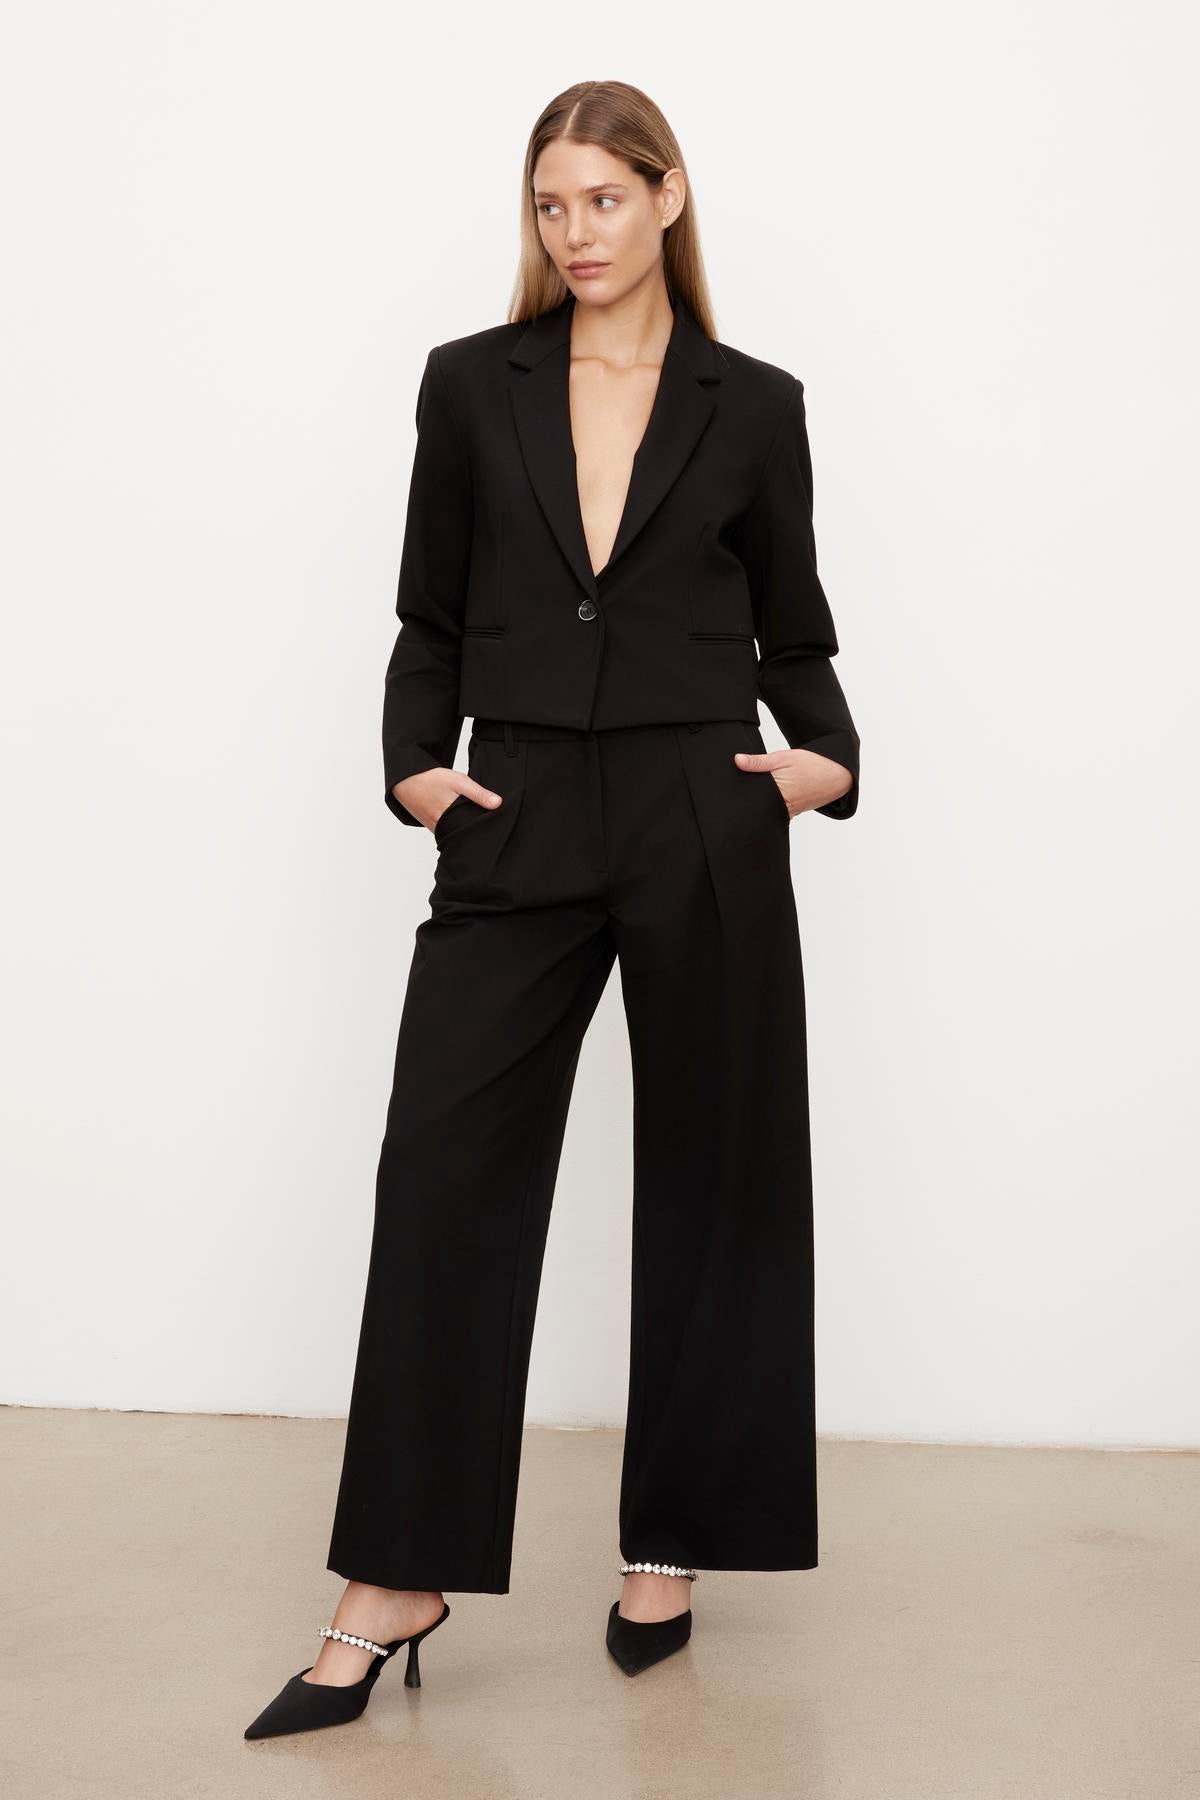   The model is wearing a double-layer ponti knit blazer with the Velvet by Graham & Spencer Leona wide leg ponti pant silhouette. 